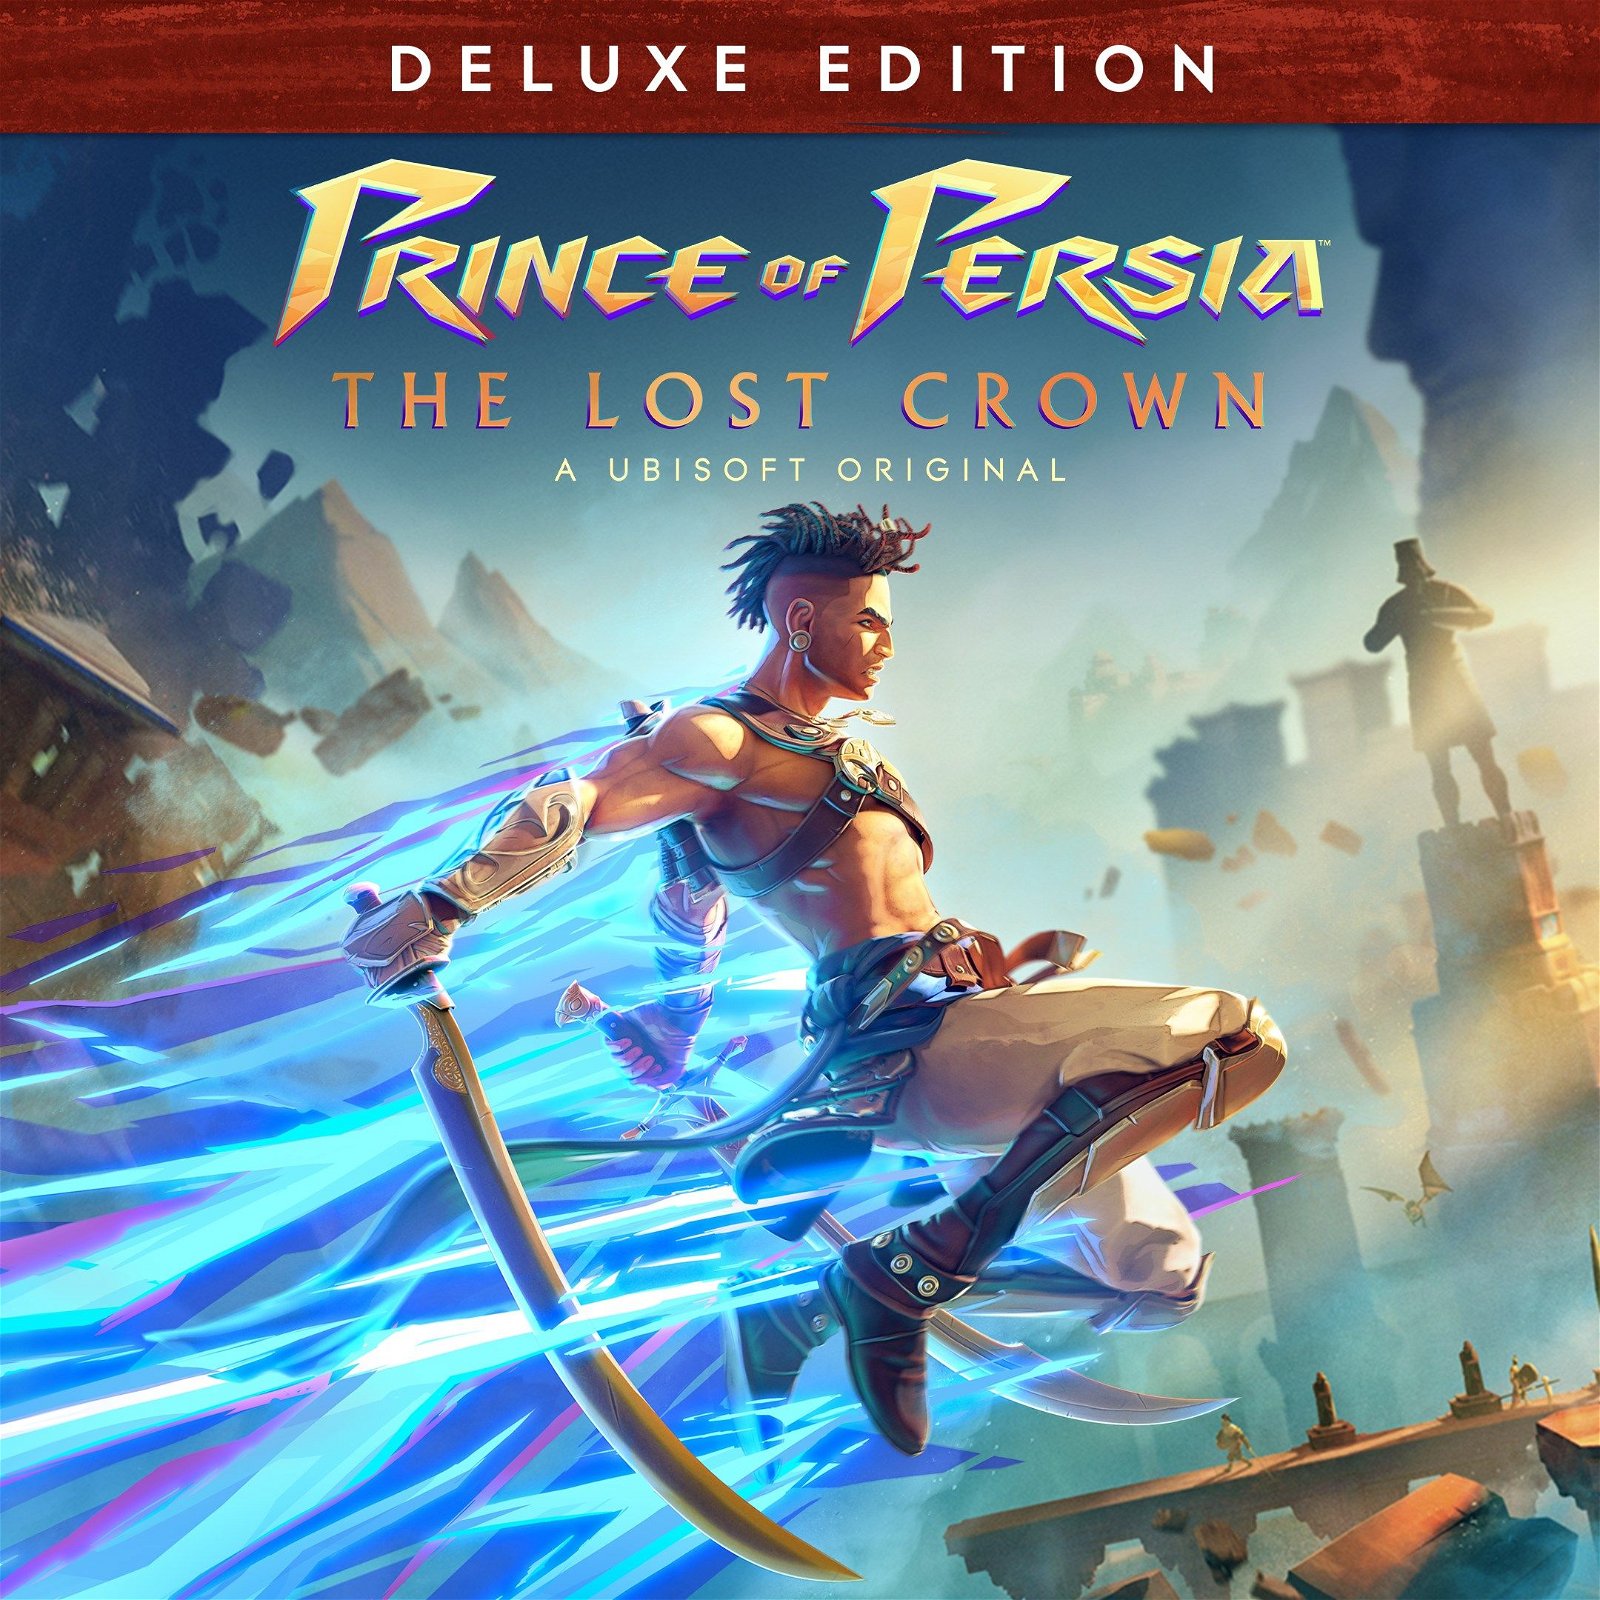 Image of Prince of Persia The Lost Crown Deluxe Edition